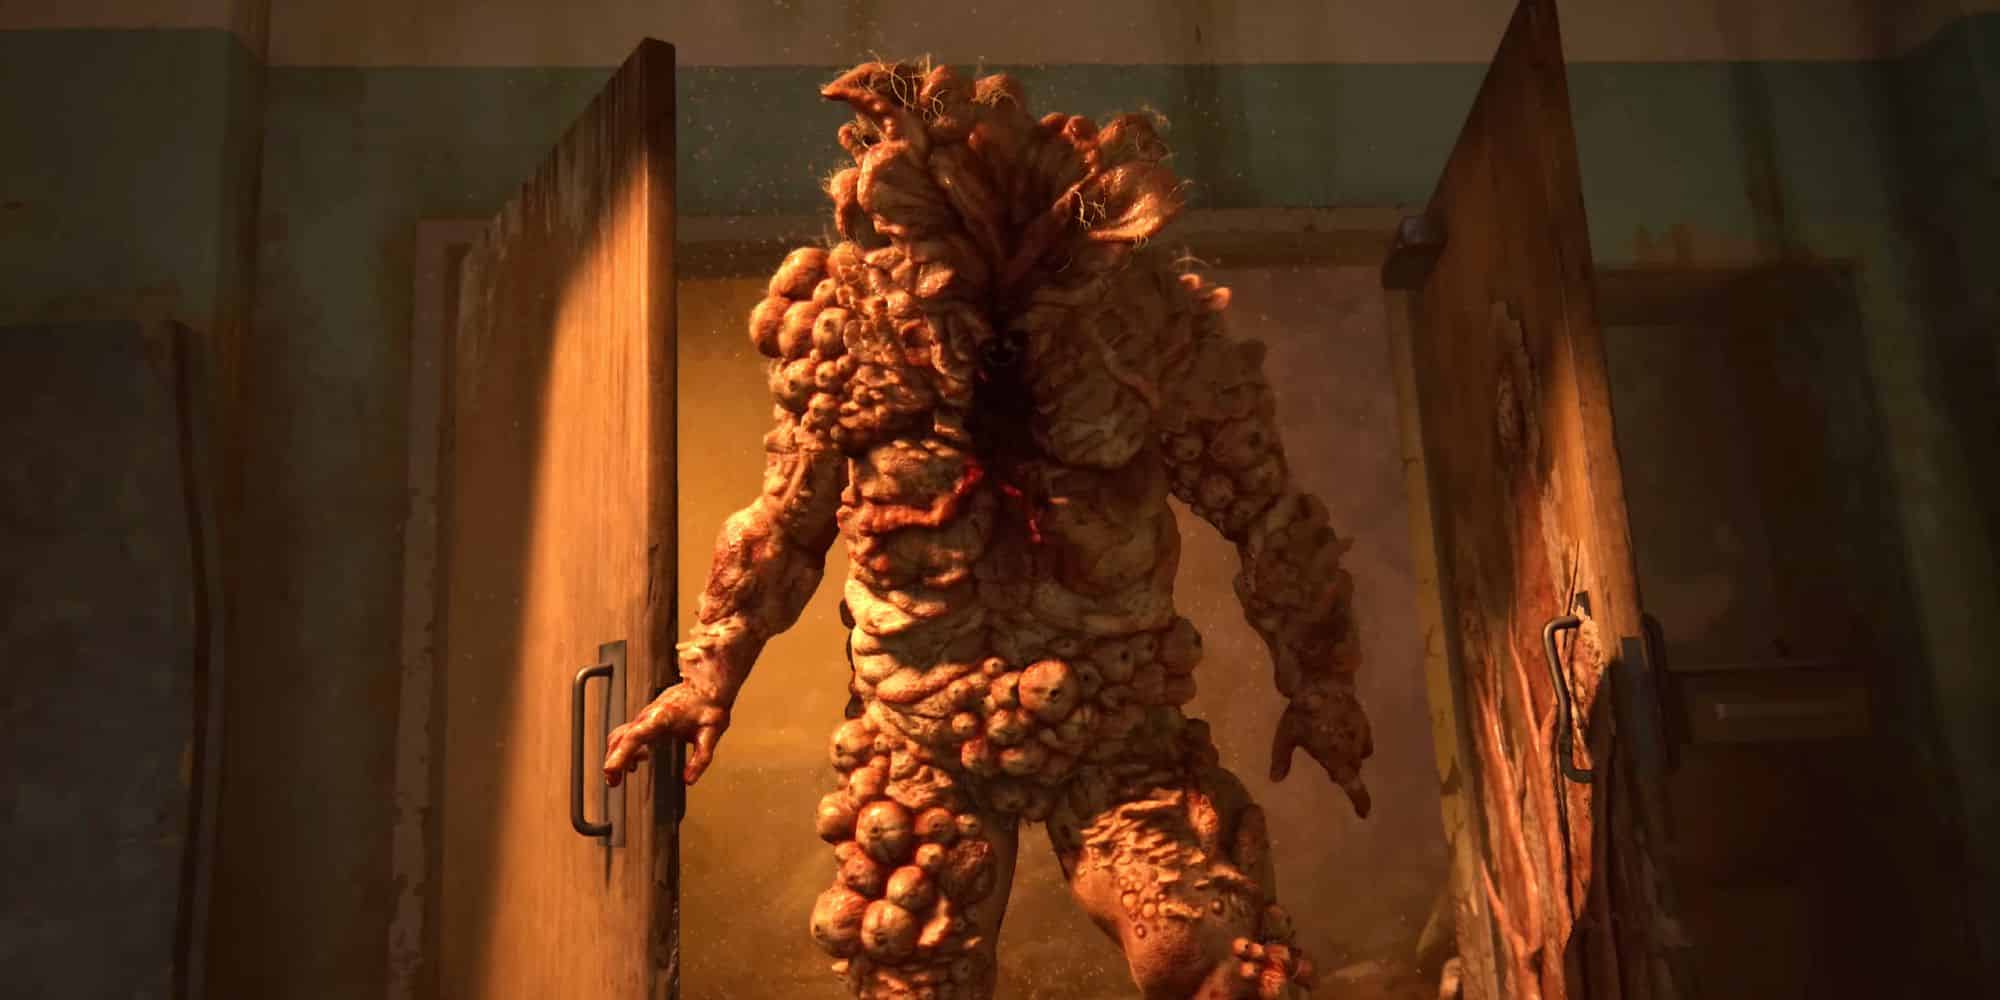 All Fungal Creatures in The Last of Us Bloater